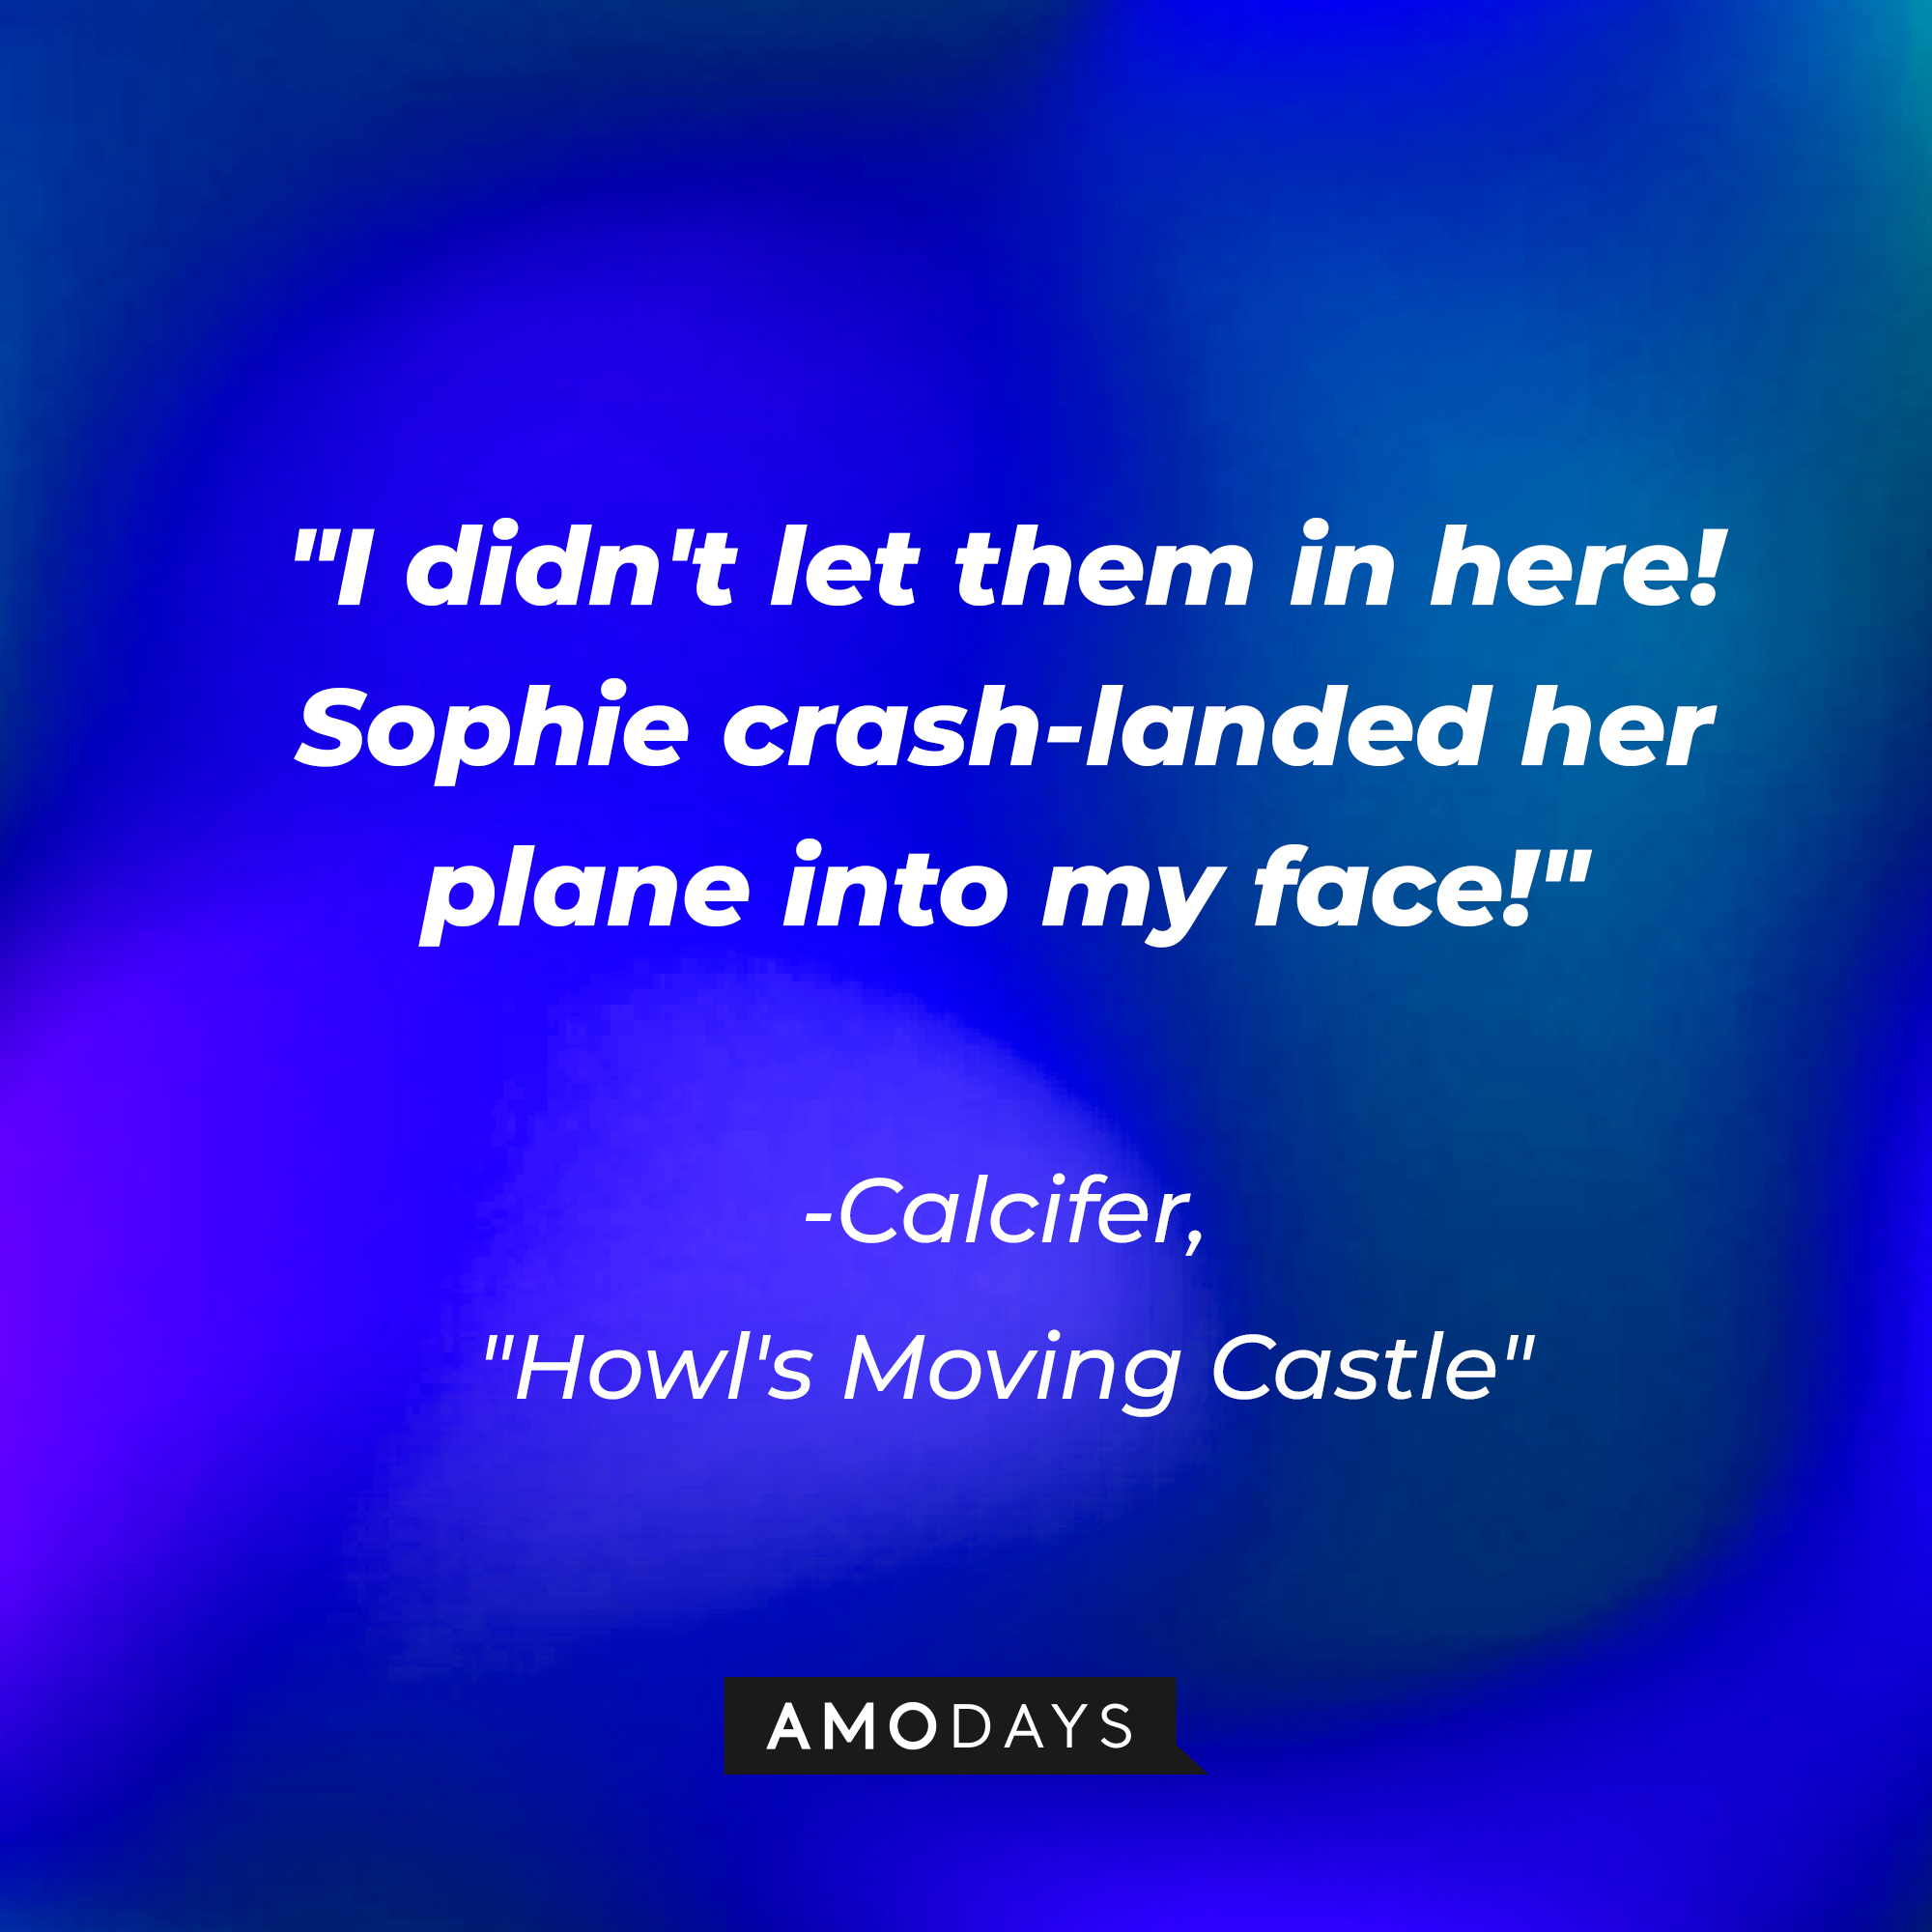 Calcifer's quote in "Howl's Moving Castle:" "I didn't let them in here! Sophie crash-landed her plane into my face!" | Source: AmoDays